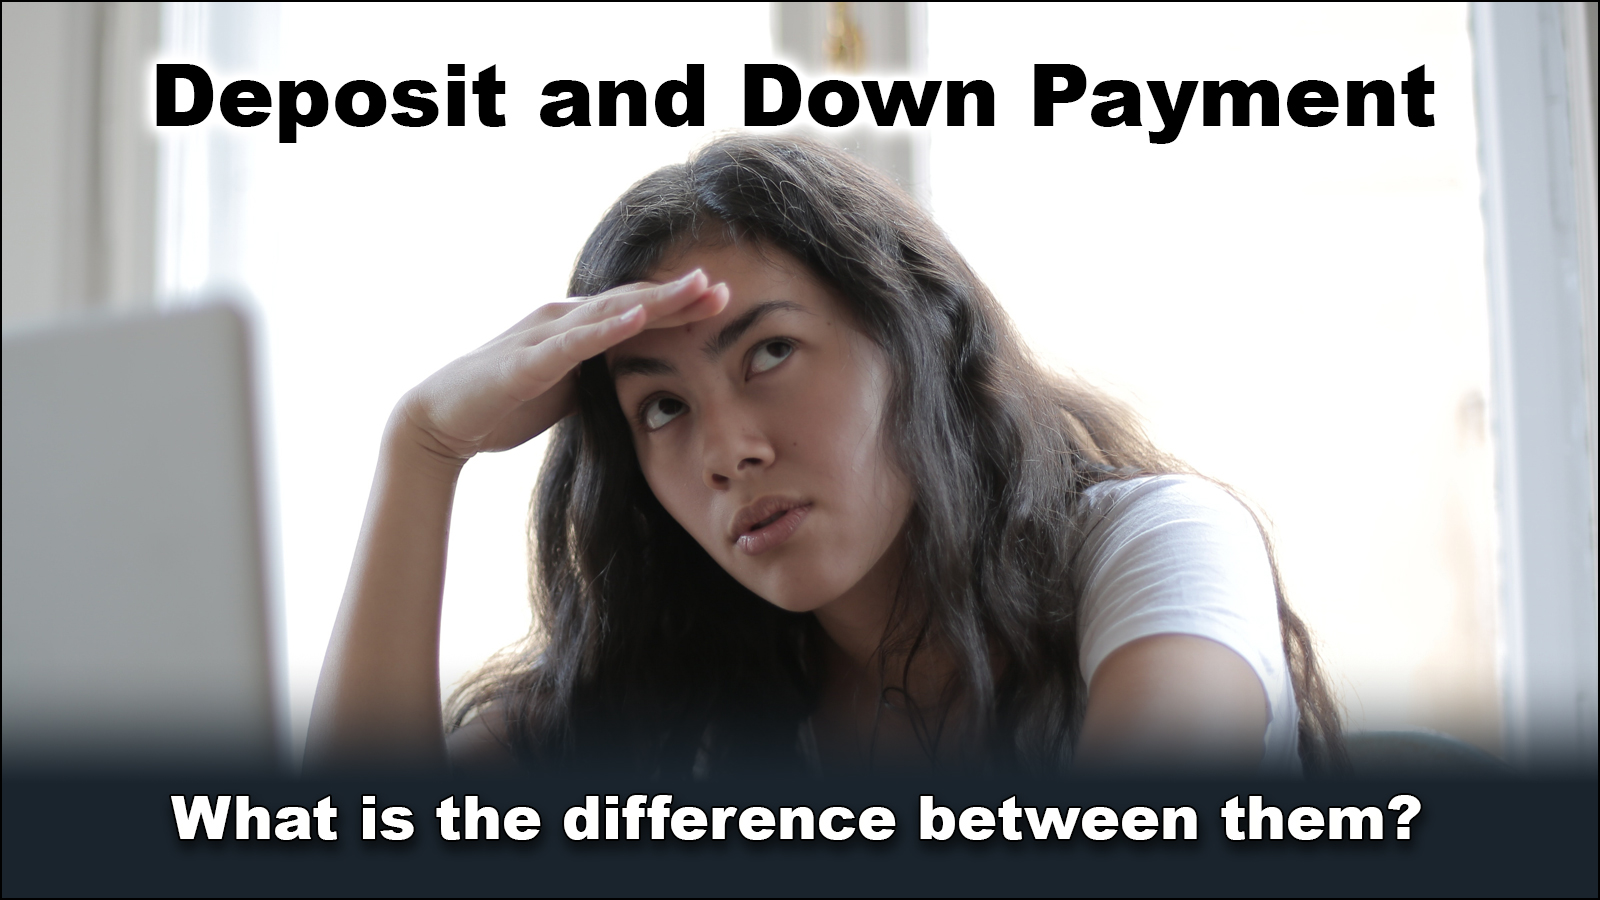 You are currently viewing Deposit and down payment, what is the difference between them?